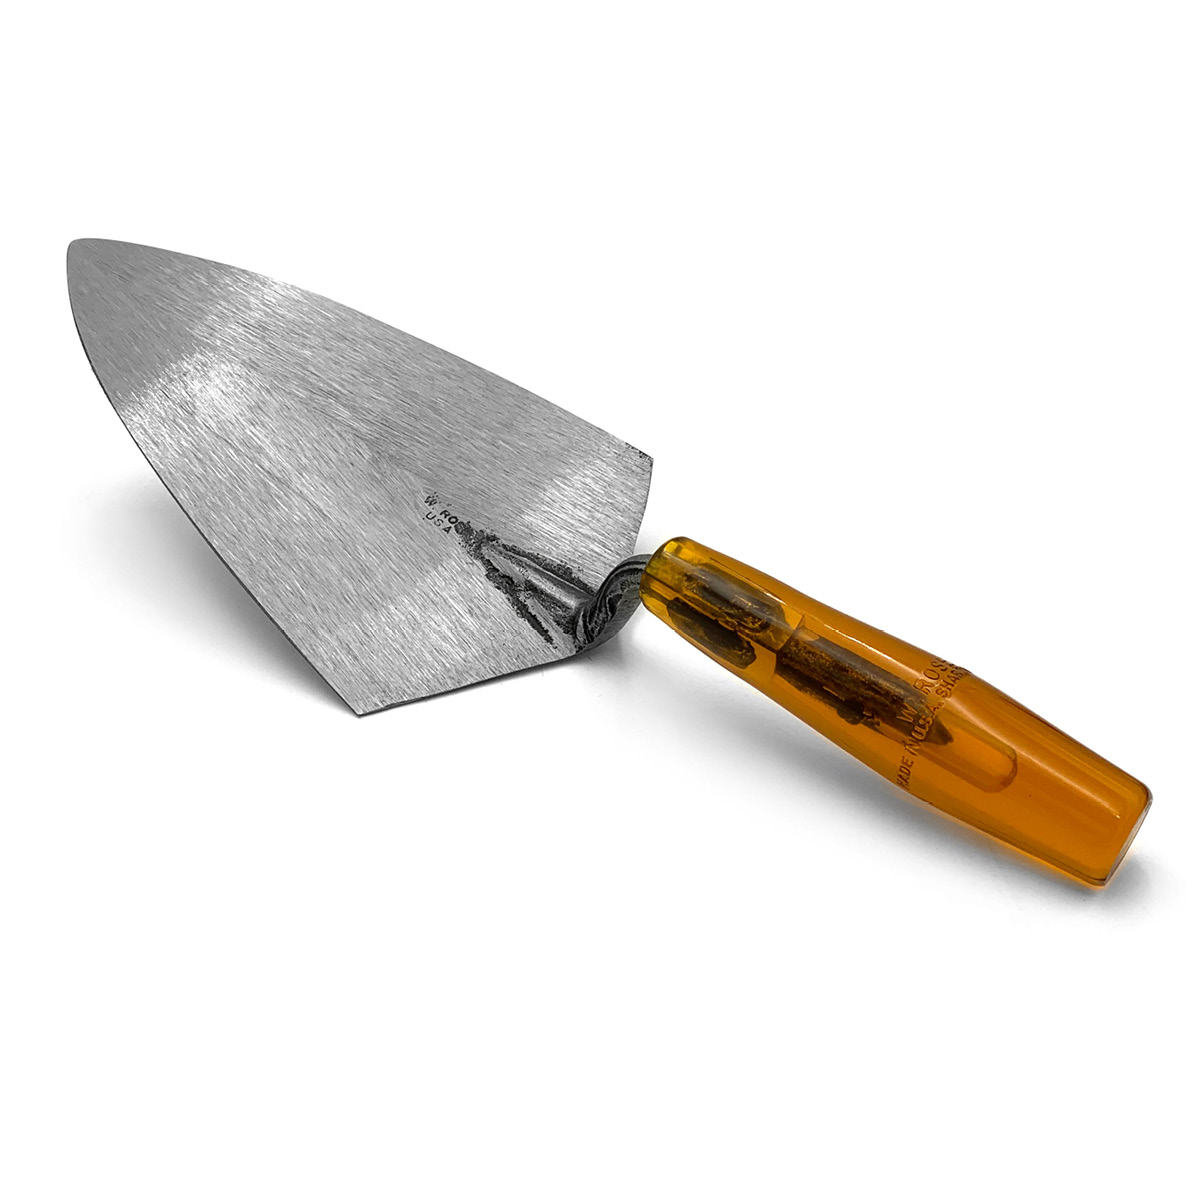 W.rose brick trowels made from a single piece of specially forged steel for extra strength. These American made trowels can be purchased in the United Kingdom via Speedcrete who sell masonry professional tools.